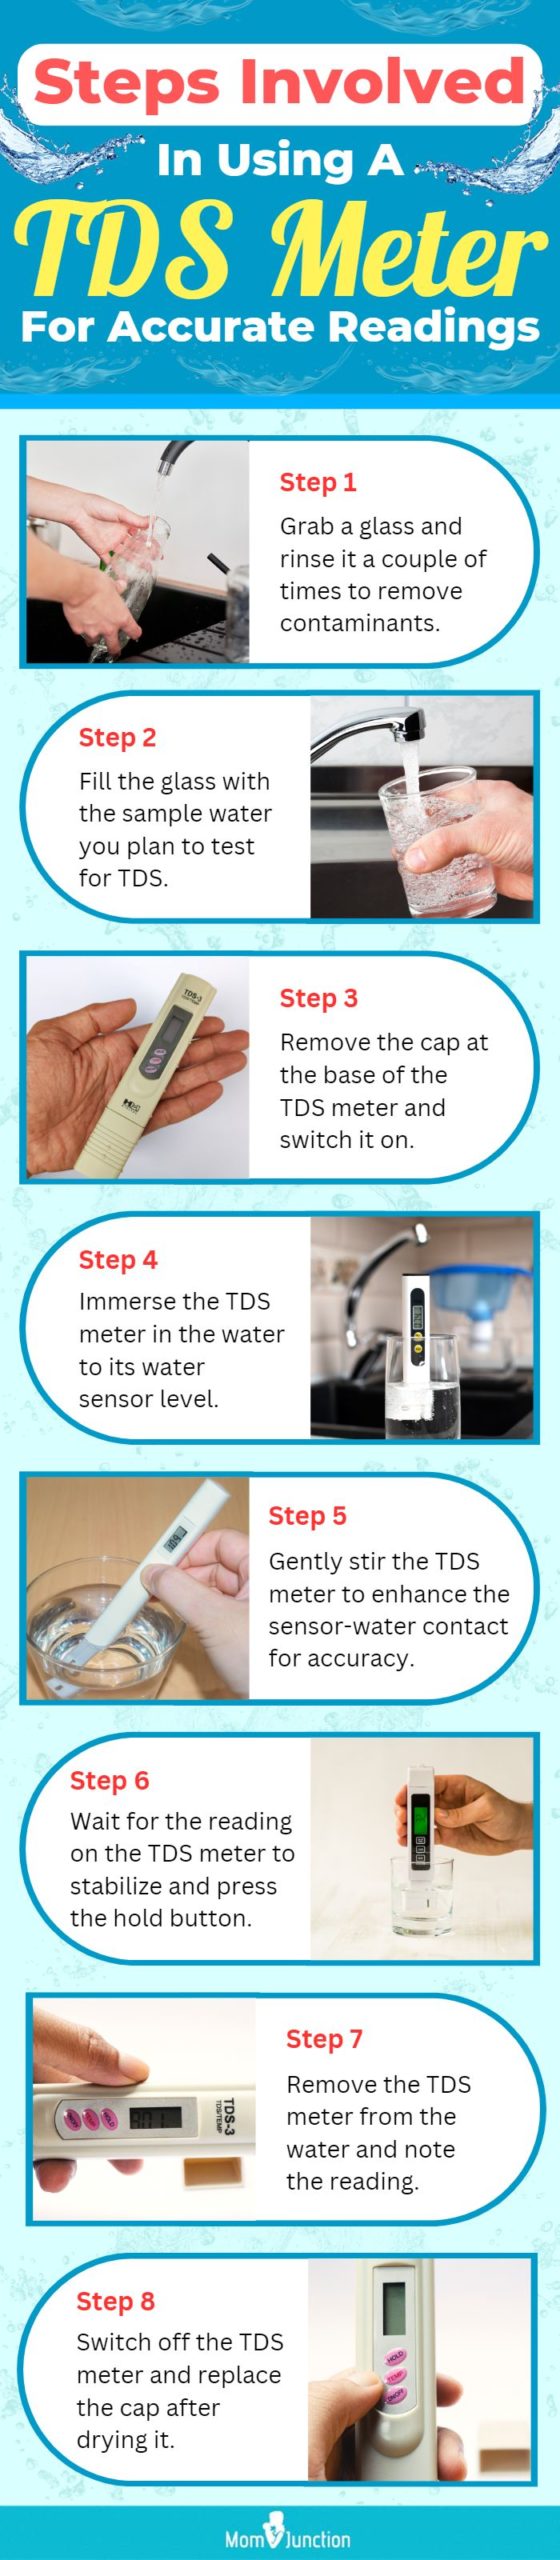 Steps Involved In Using A TDS Meter For Accurate Readings (infographic)